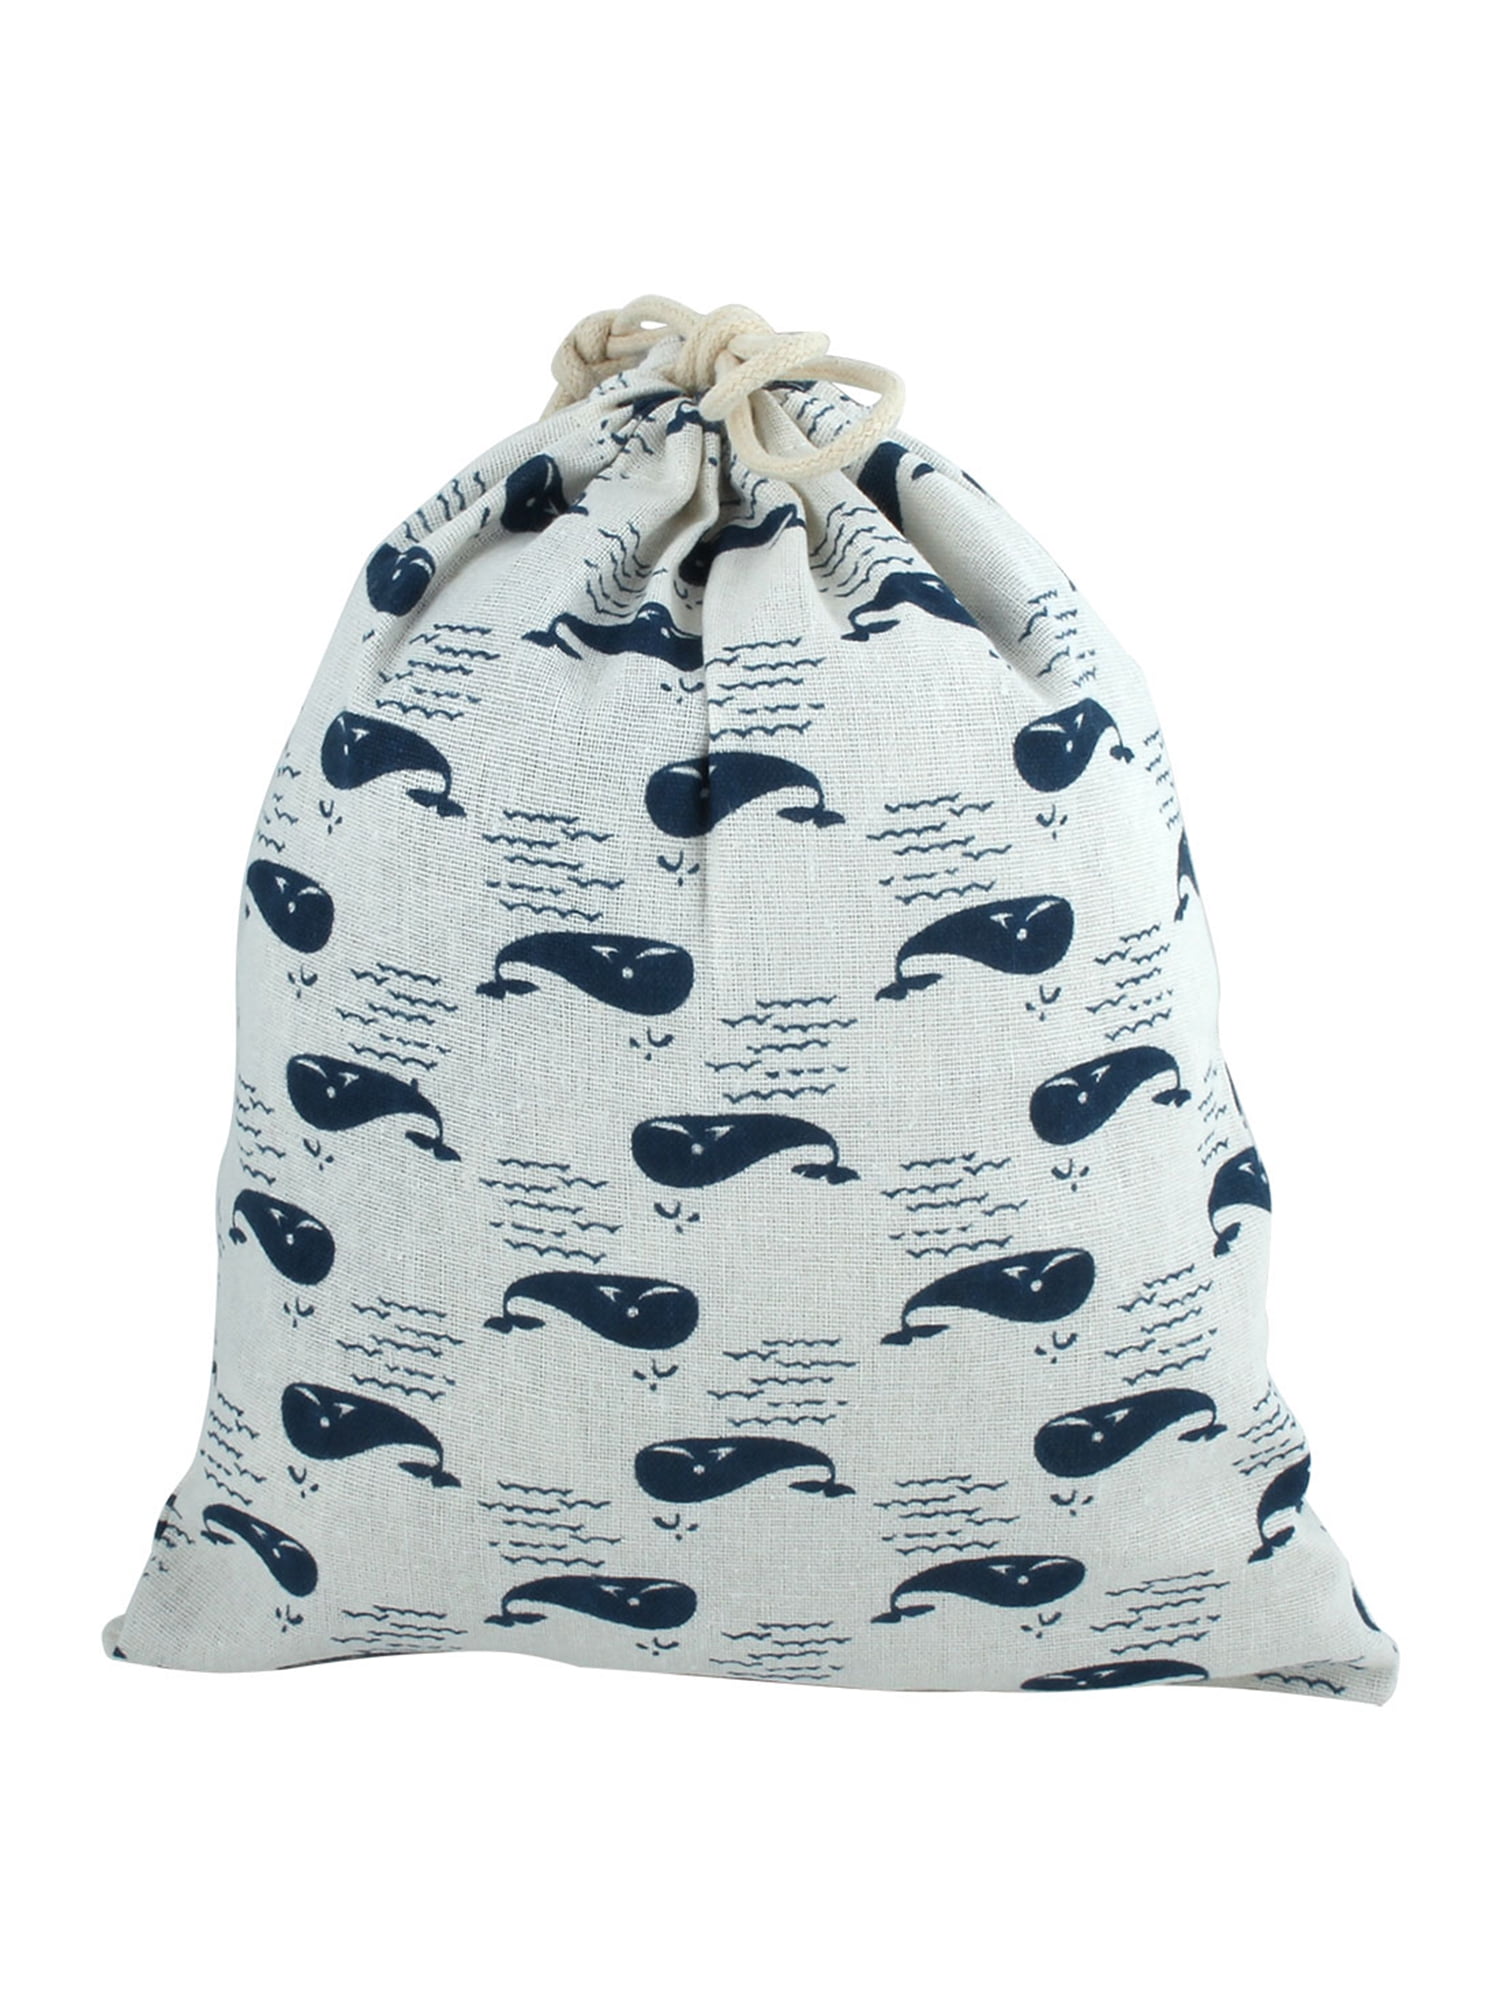 Cotton Linen Drawstring Small Bag Storage Travel Packaging Sale-Blue Whale 2 